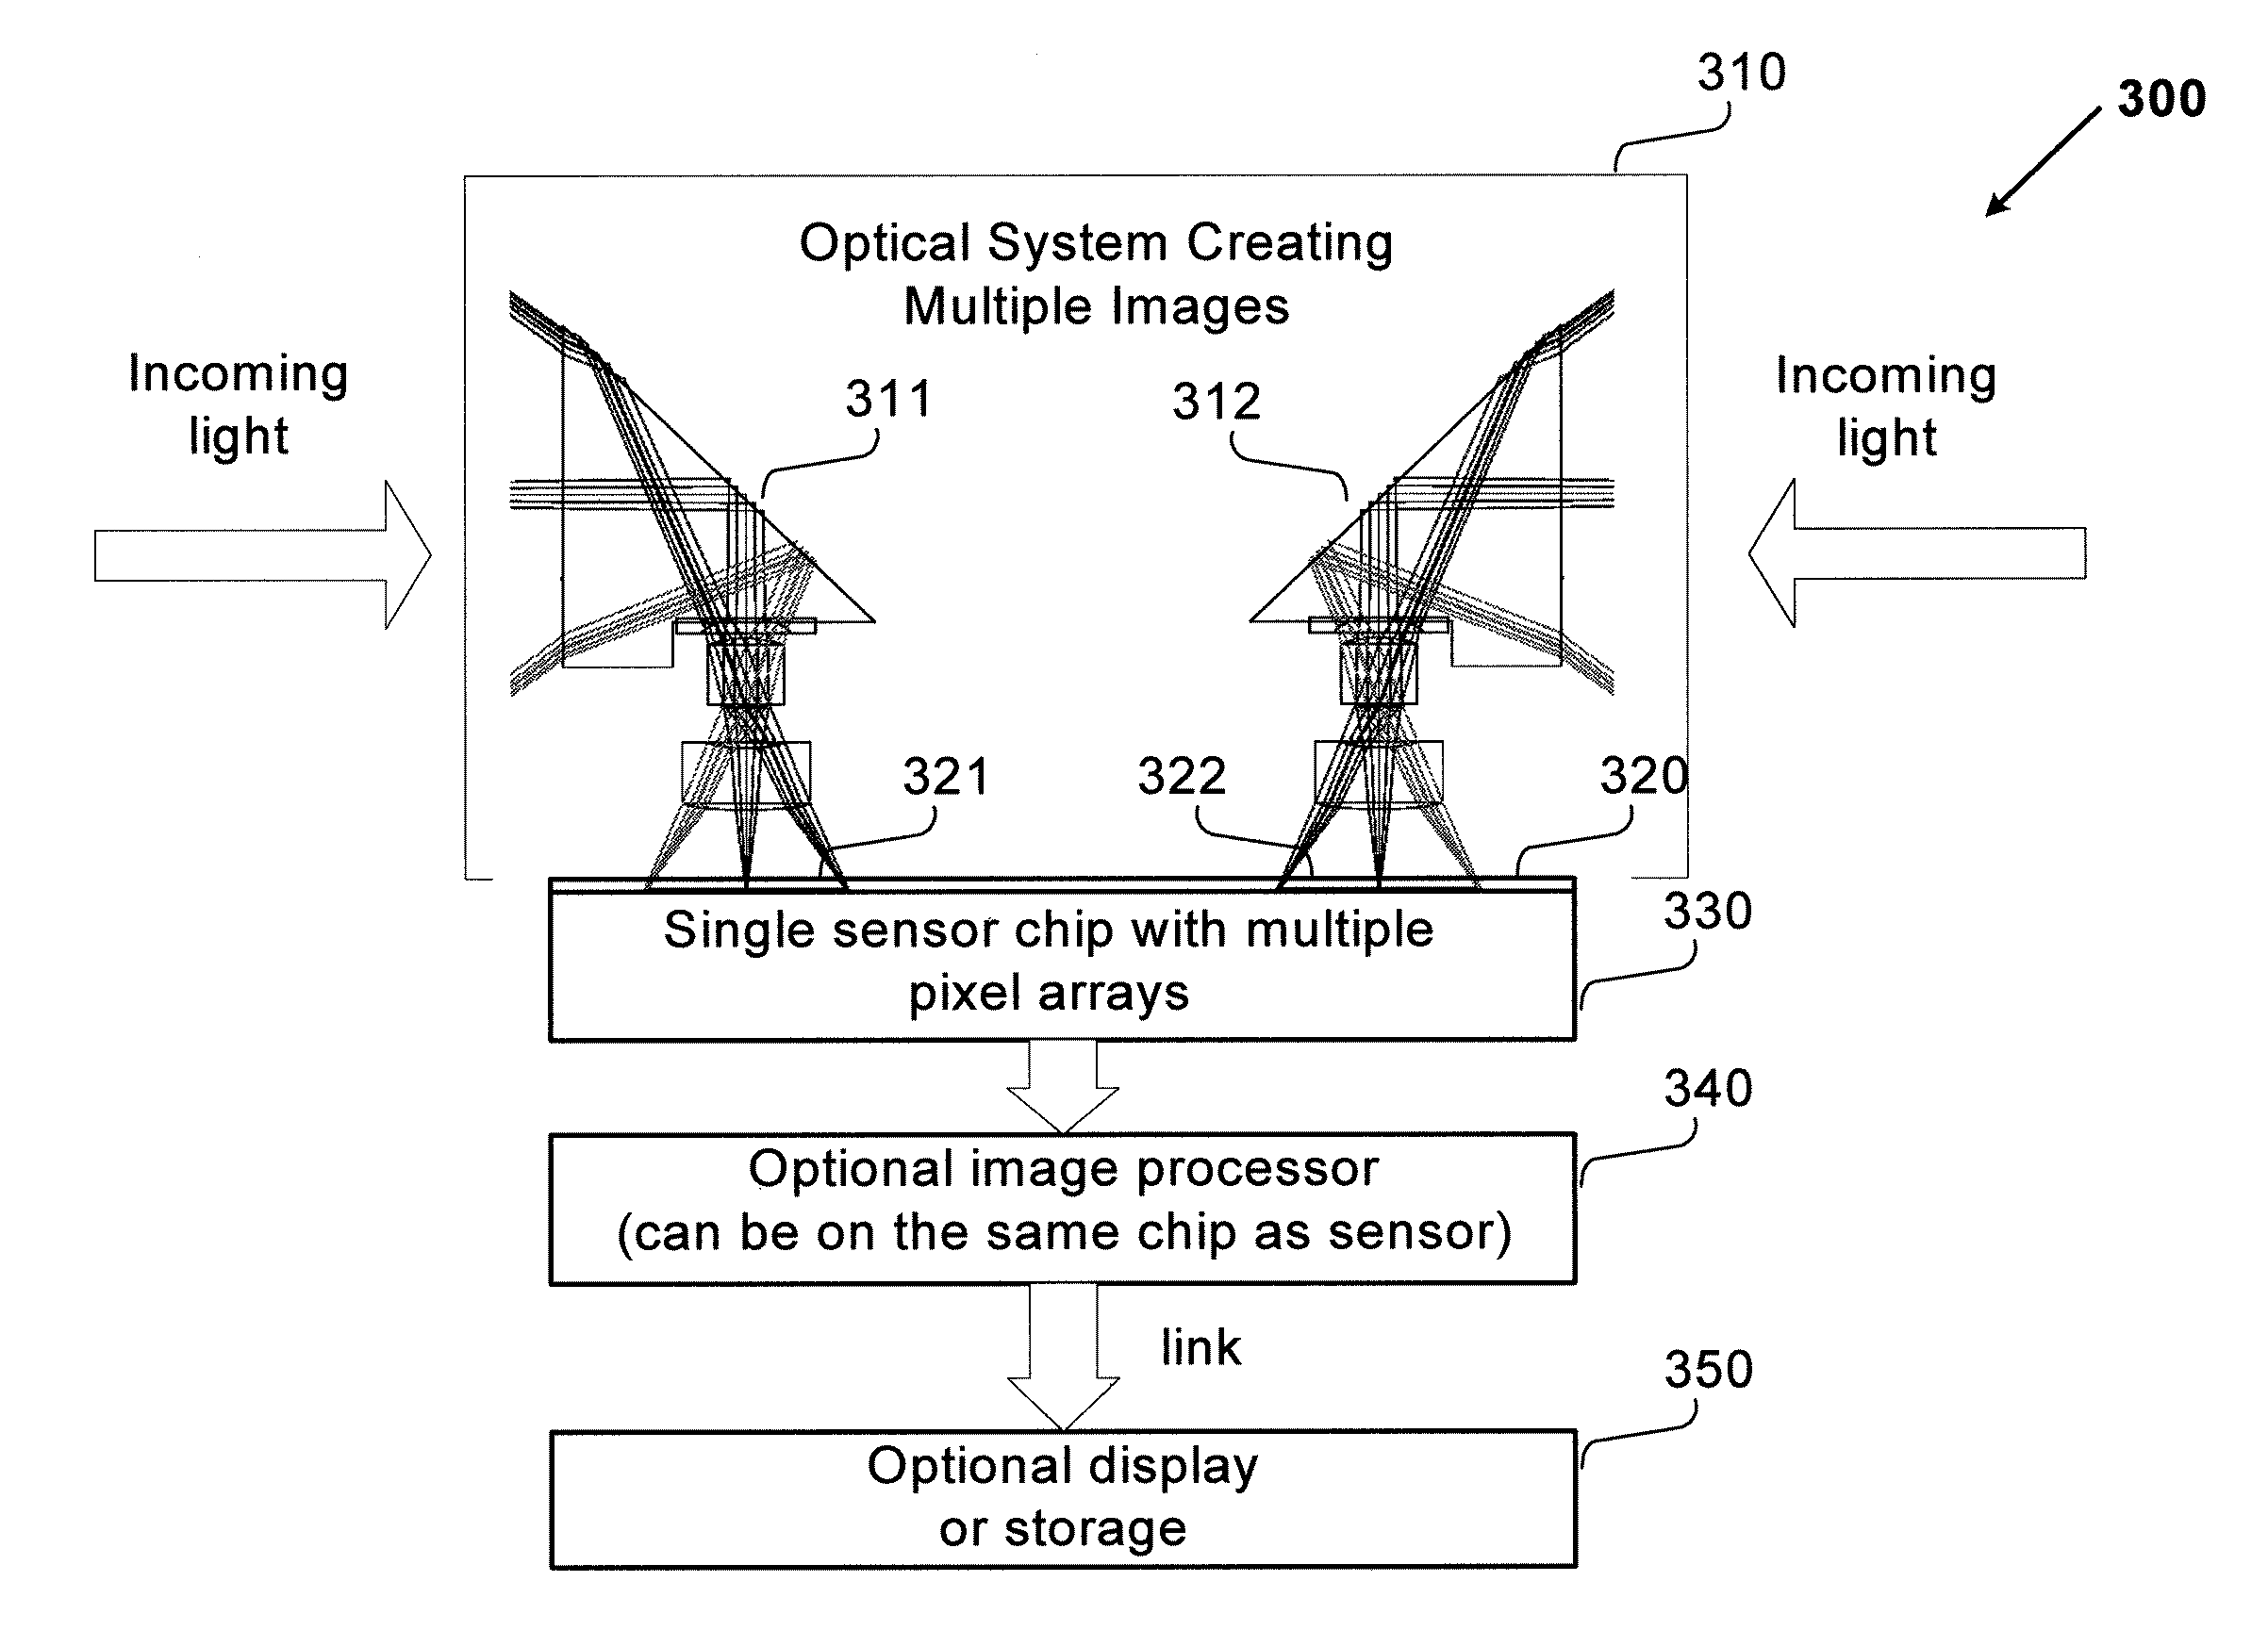 Camera system with multiple pixel arrays on a chip